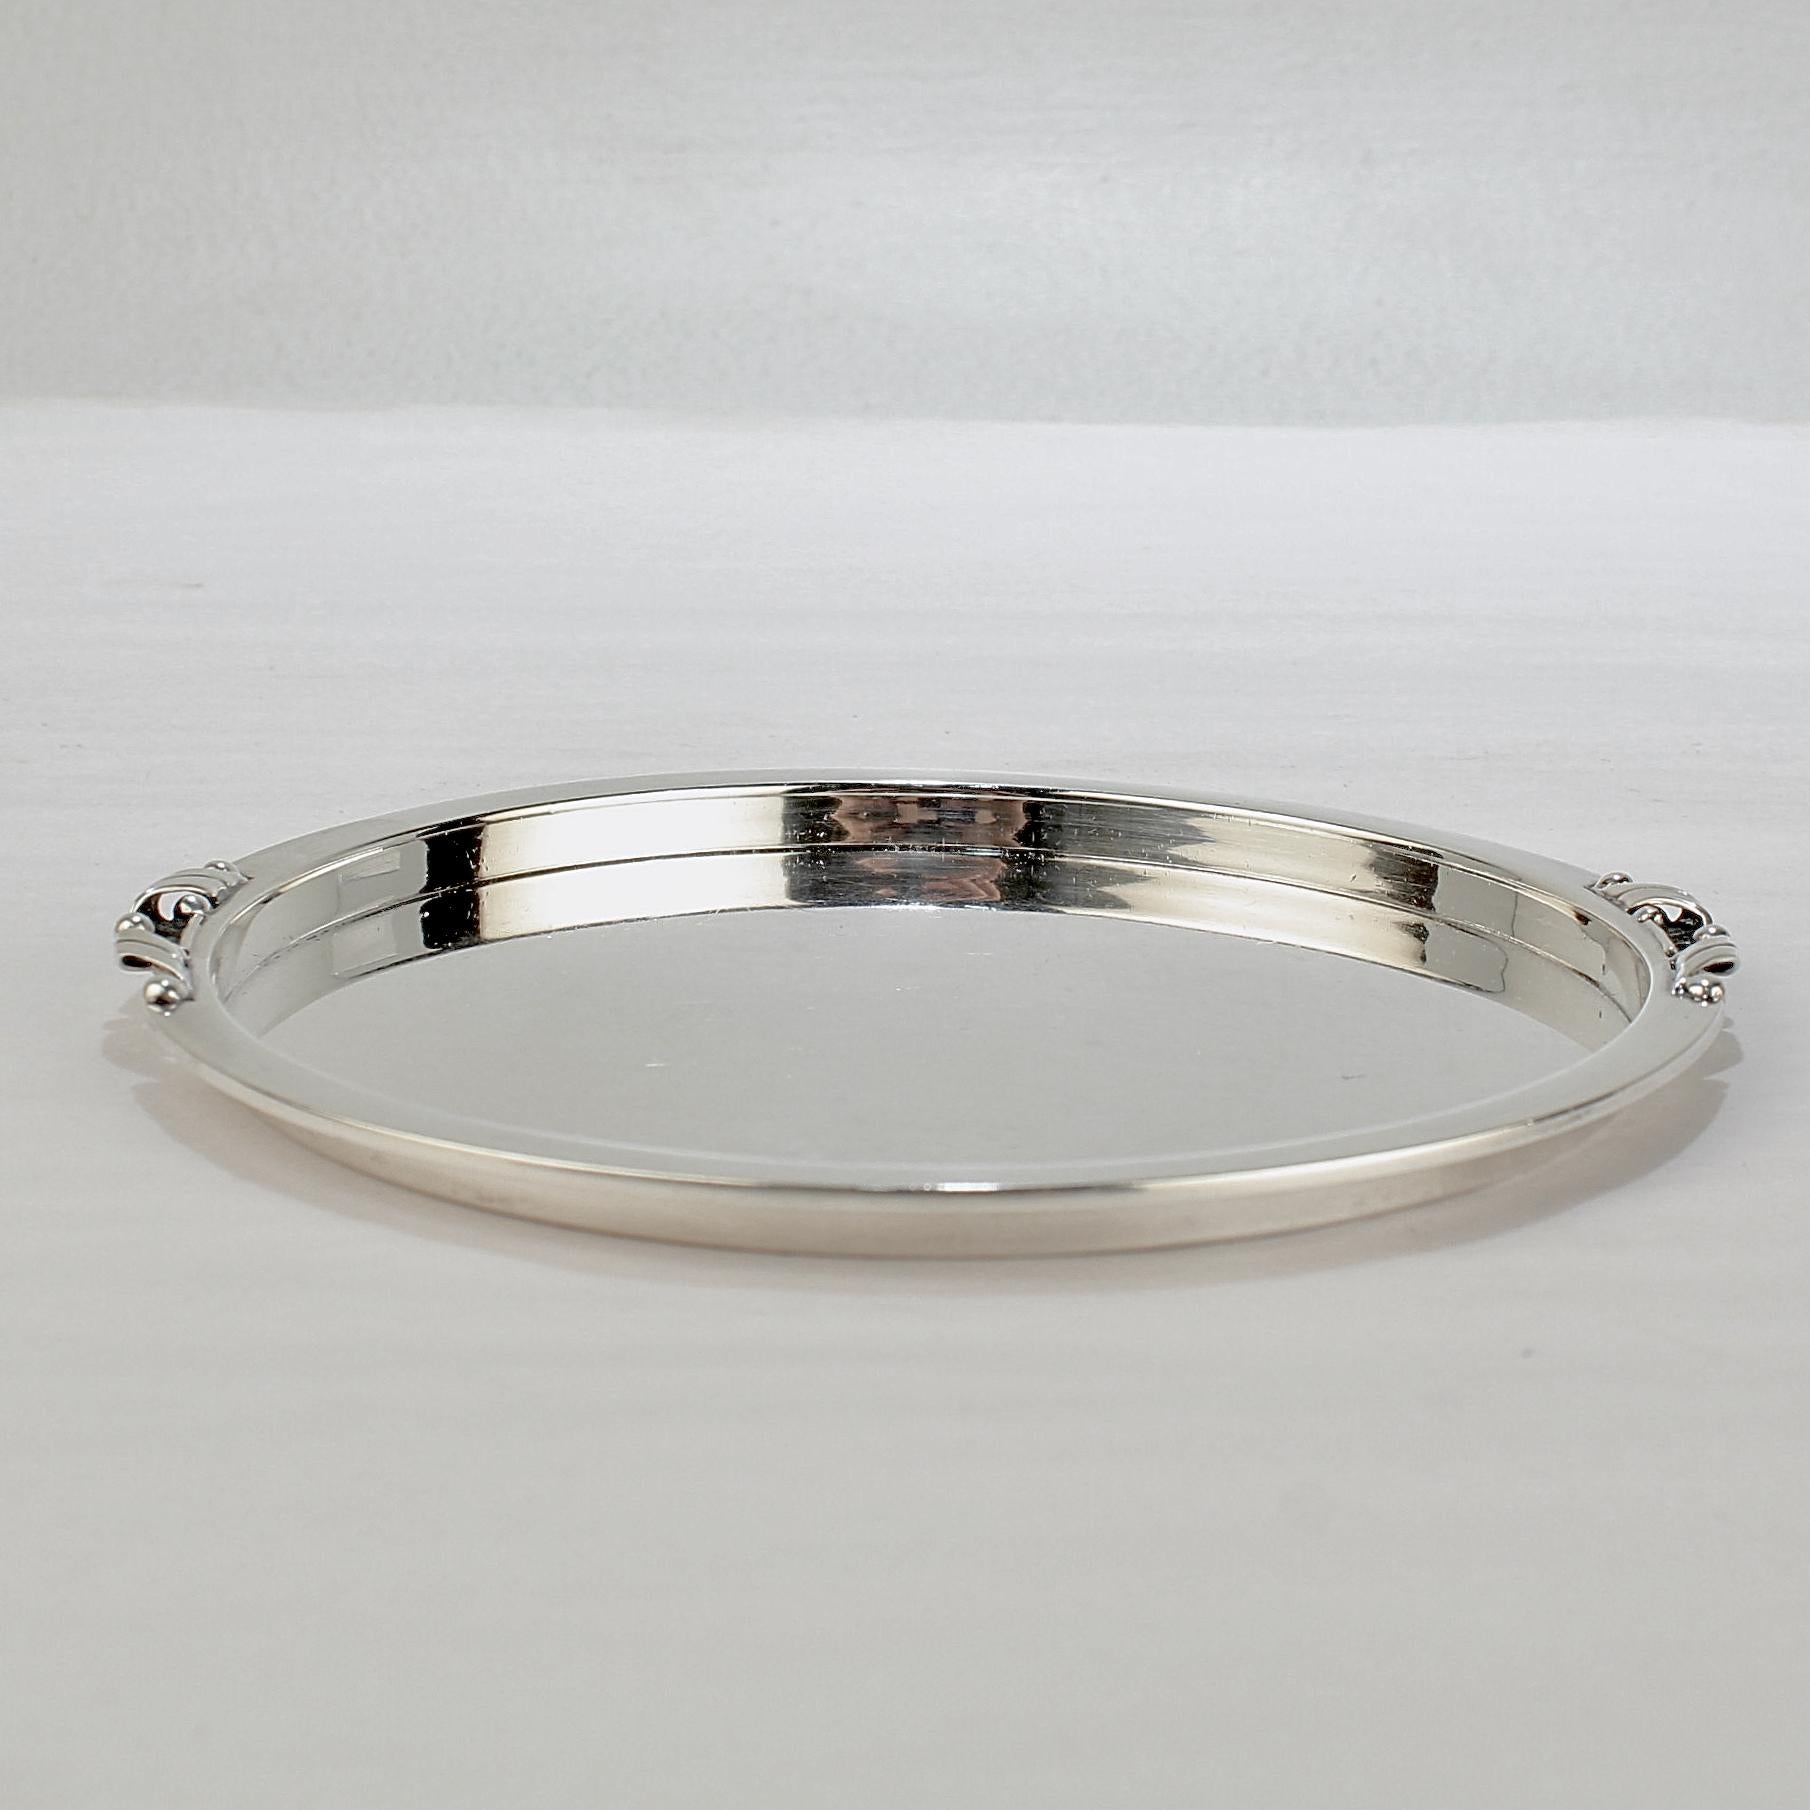 Art Deco Georg Jensen Sterling Silver Small Tray or Dish No. 639 1